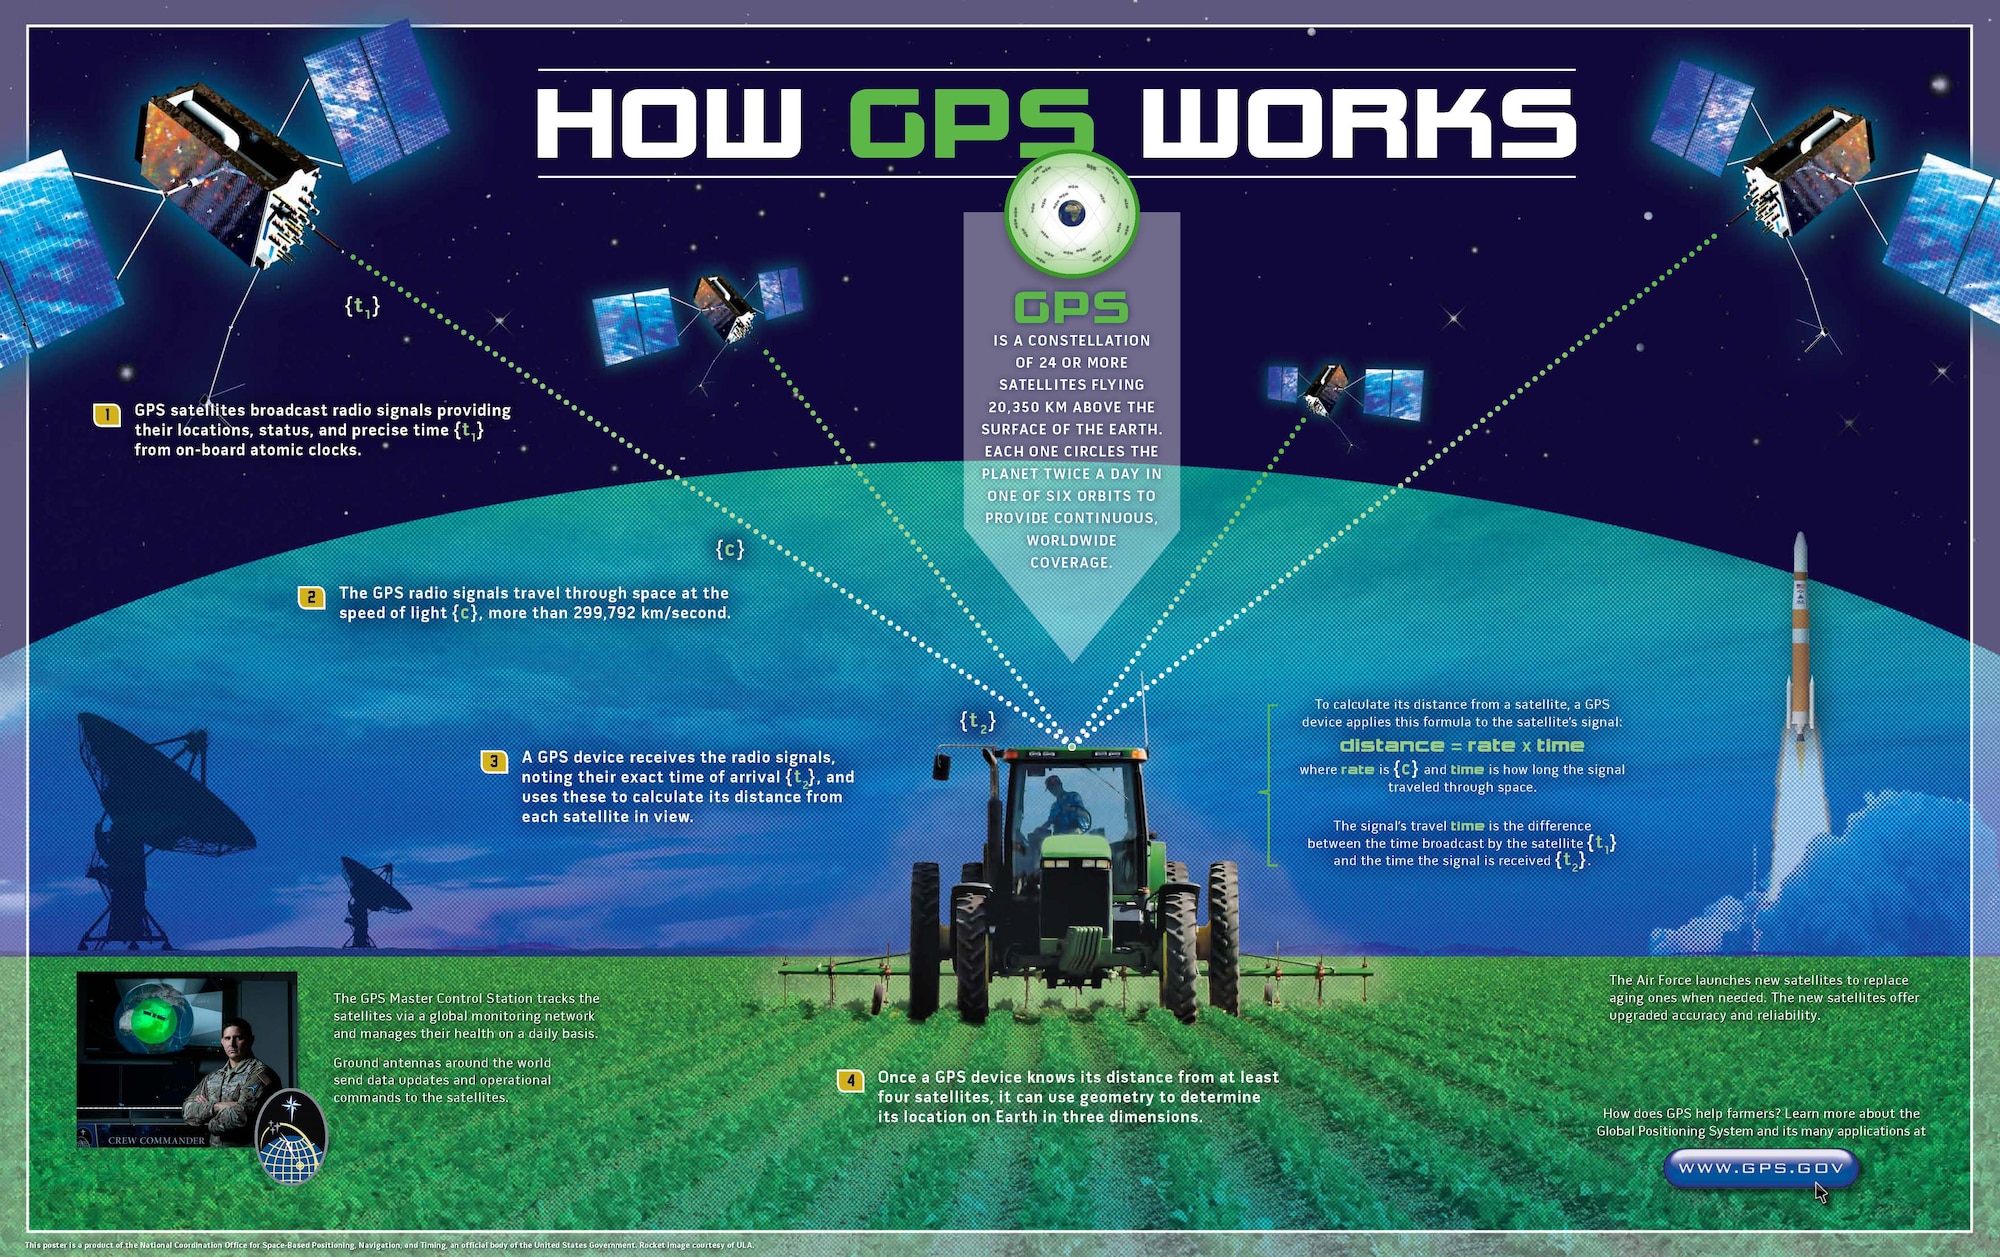 A graphic showcases how the Global Positioning System works. To provide continuous worldwide coverage, 2nd Space Operations Squadron utilizes 31 active GPS satellites orbiting the Earth at around 14,000 kph. 2nd SOPS can determine the exact global position of a device based on the differing amounts of time a device takes to receive signals from each of the satellites in view. For someone to have proper GPS connectivity, their device needs to have at least four of the 31 GPS satellites in view. (This poster is a product of the National Coordination Office for Space-Based Positioning, Navigation, and Timing, an official body of the United States Government. Rocket image courtesy of United Launch Alliance.)